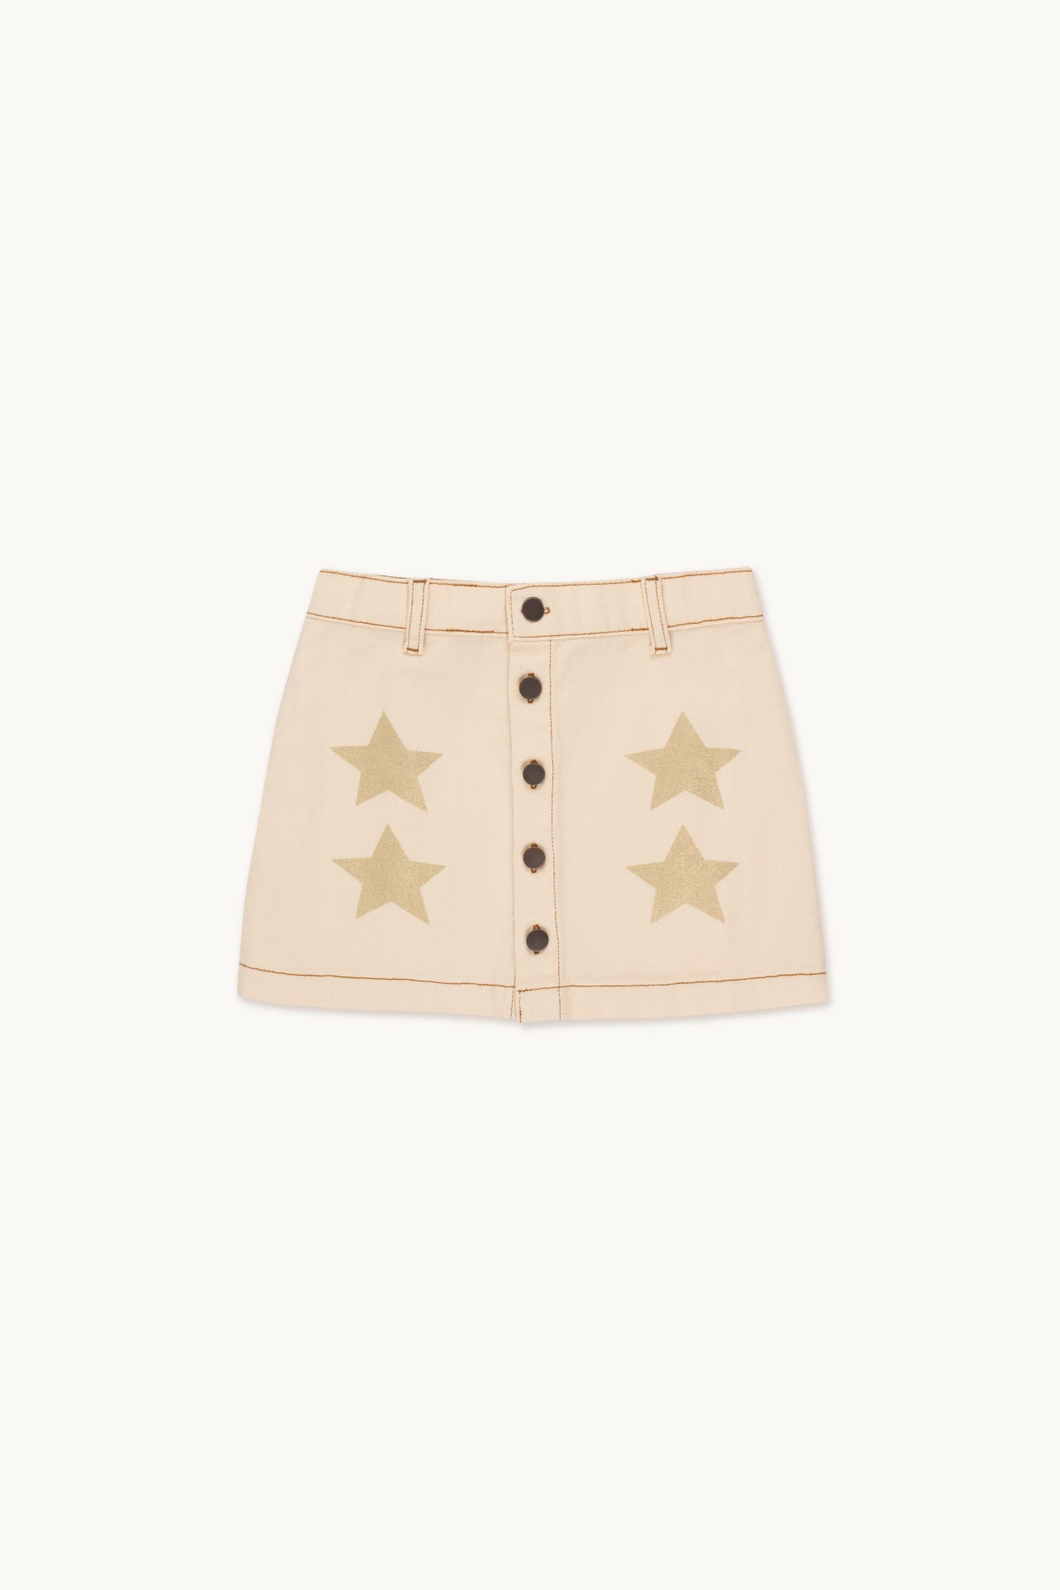 Tinycottons Stars Skirt - 3Y, 4Y, 6Y